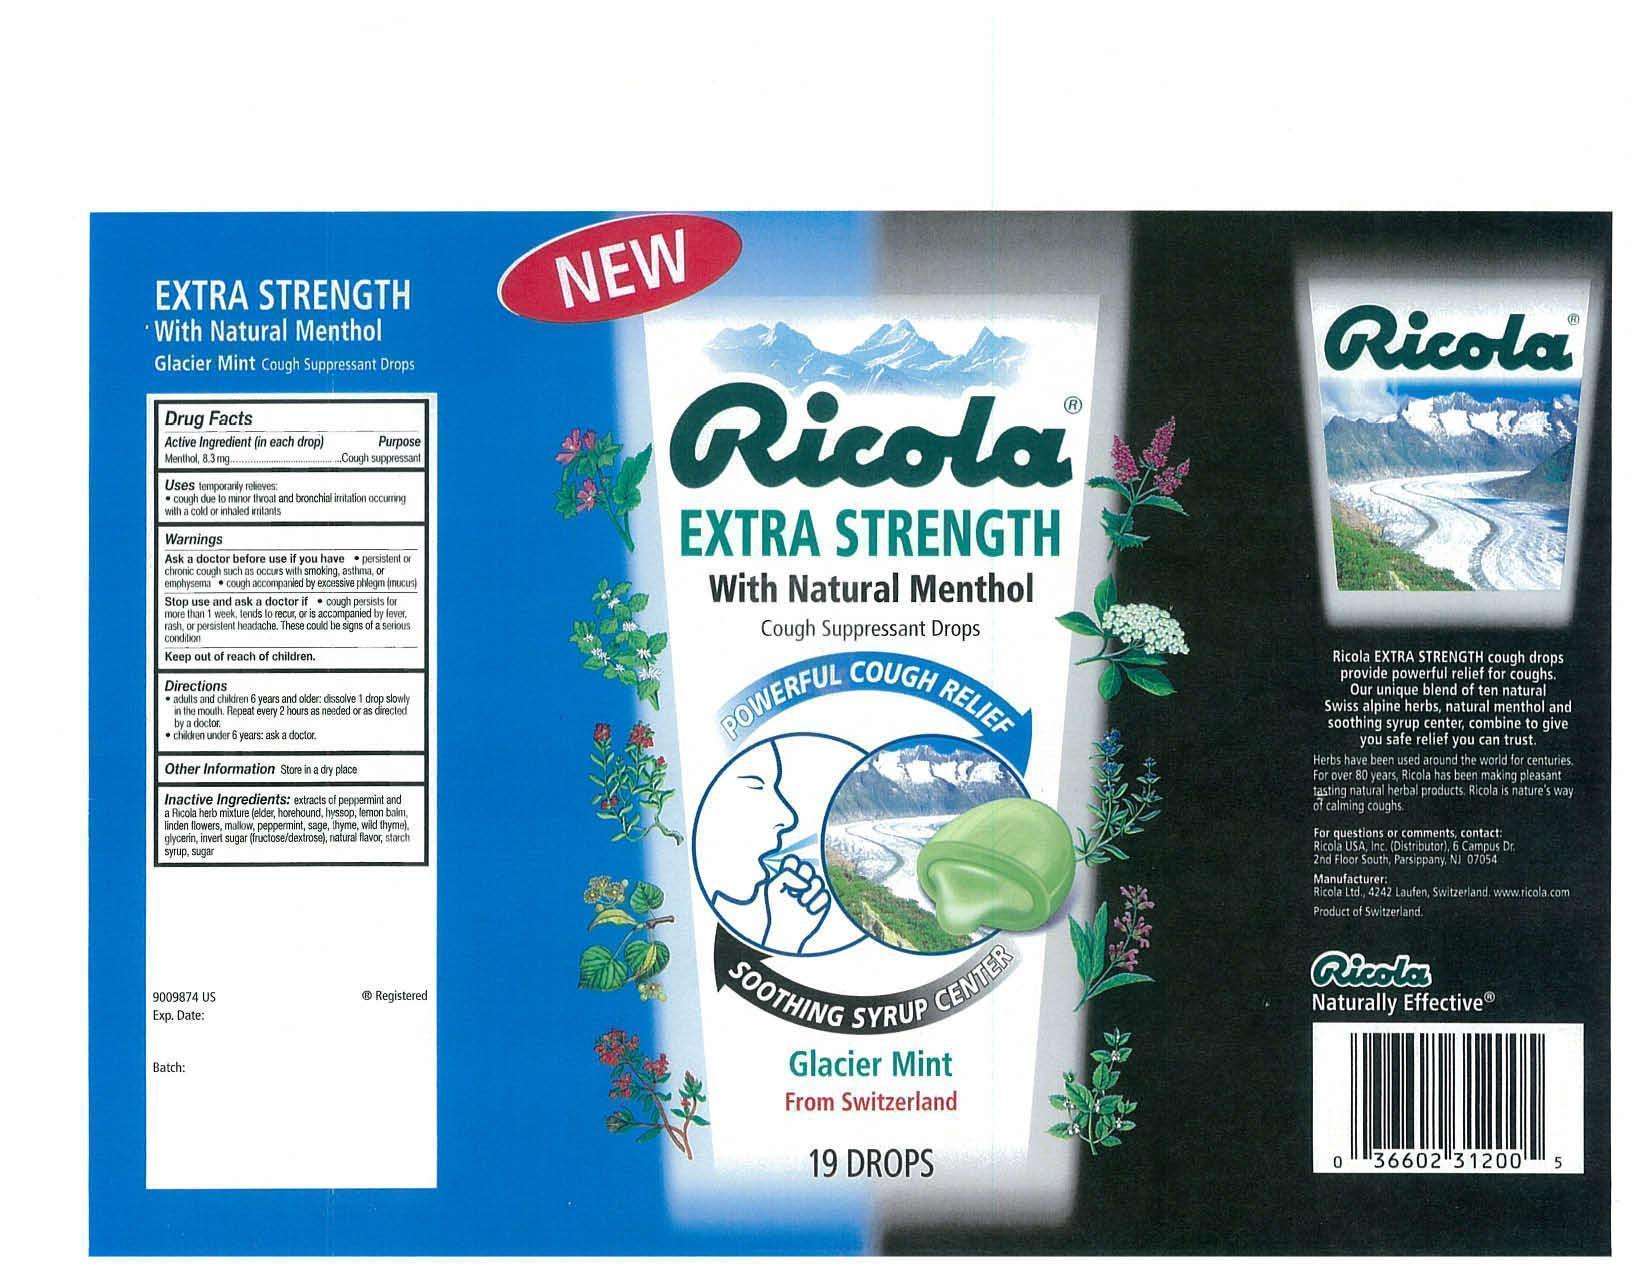 EXTRA STRENGTH WITH NATURAL MENTHOL GLACIER MINT COUGH SUPPRESSANT